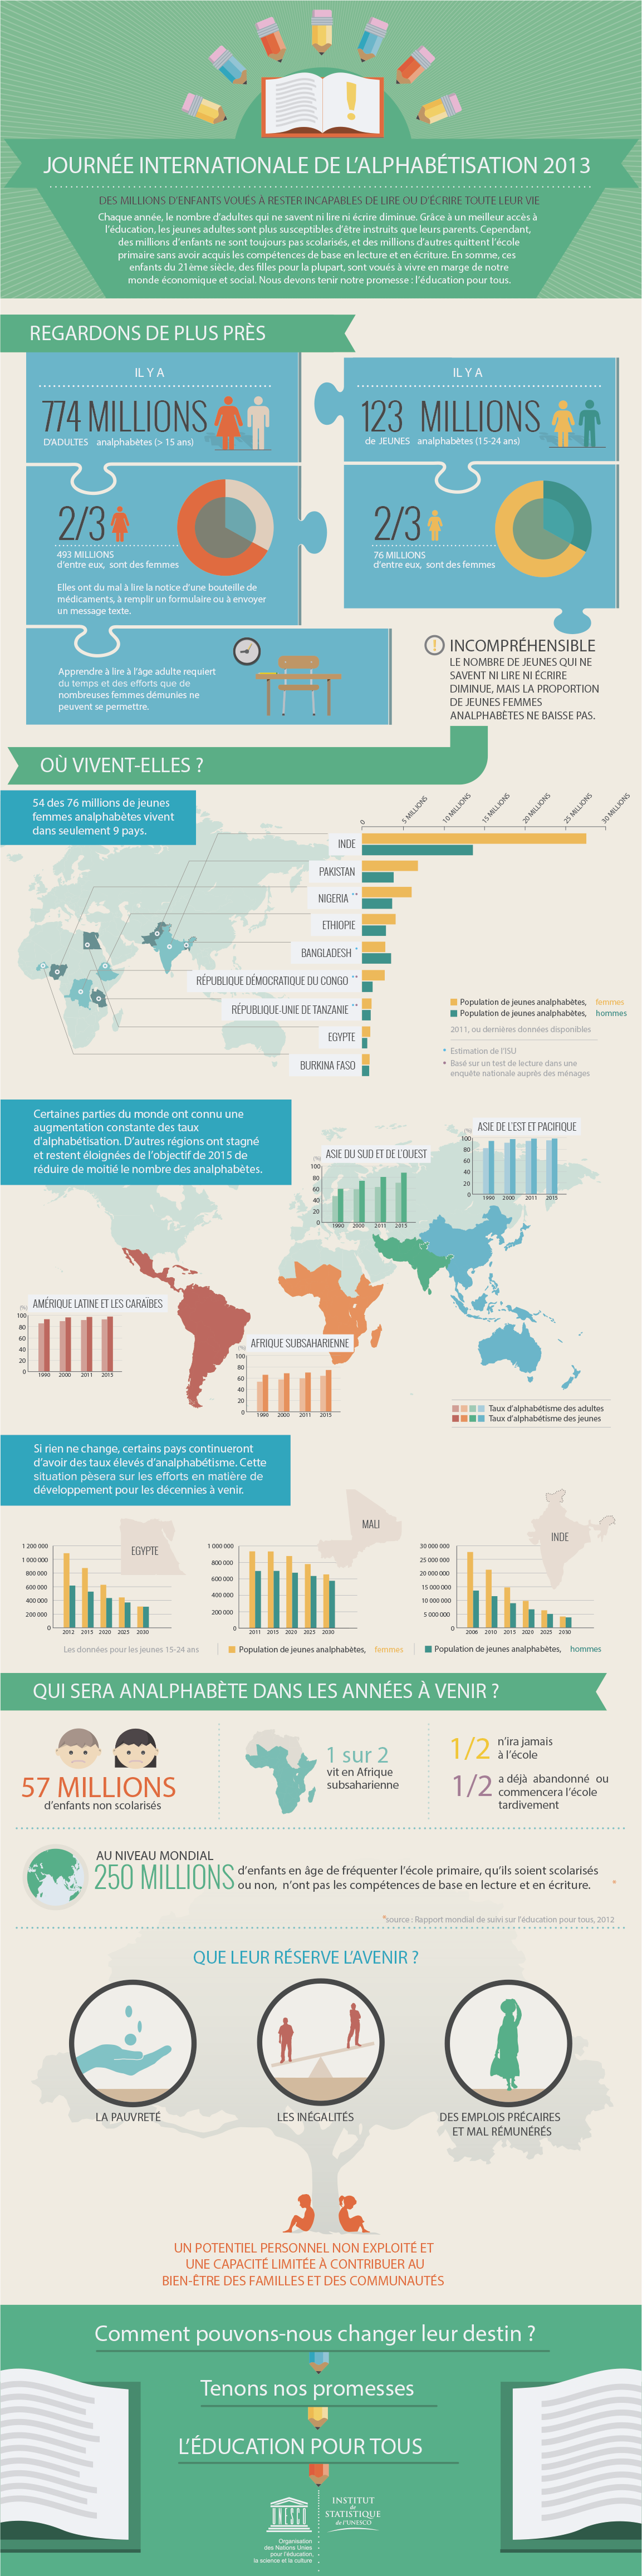 literacy-infographic-2013-fr-2.png